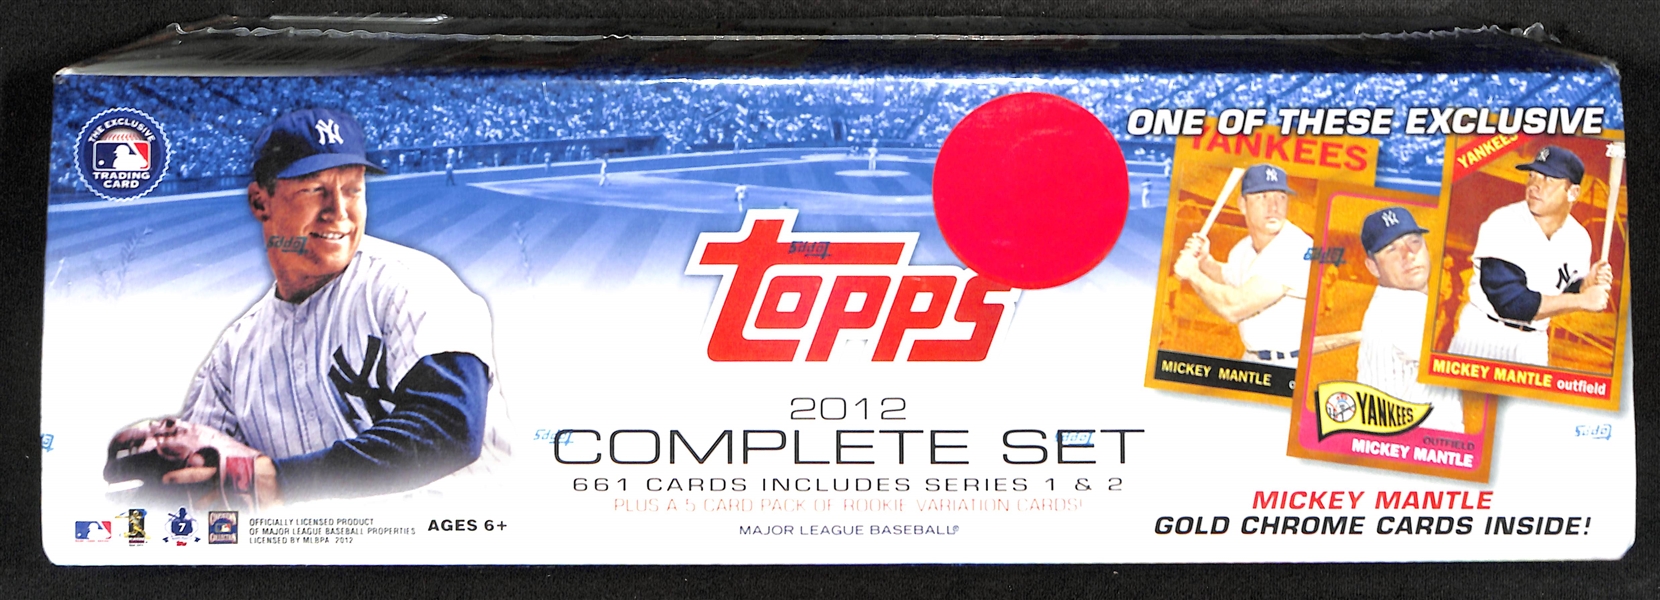 Lot of (2) Factory Sealed Topps Baseball Complete Sets - 1999, 2012 (Mantle Gold Chrome)